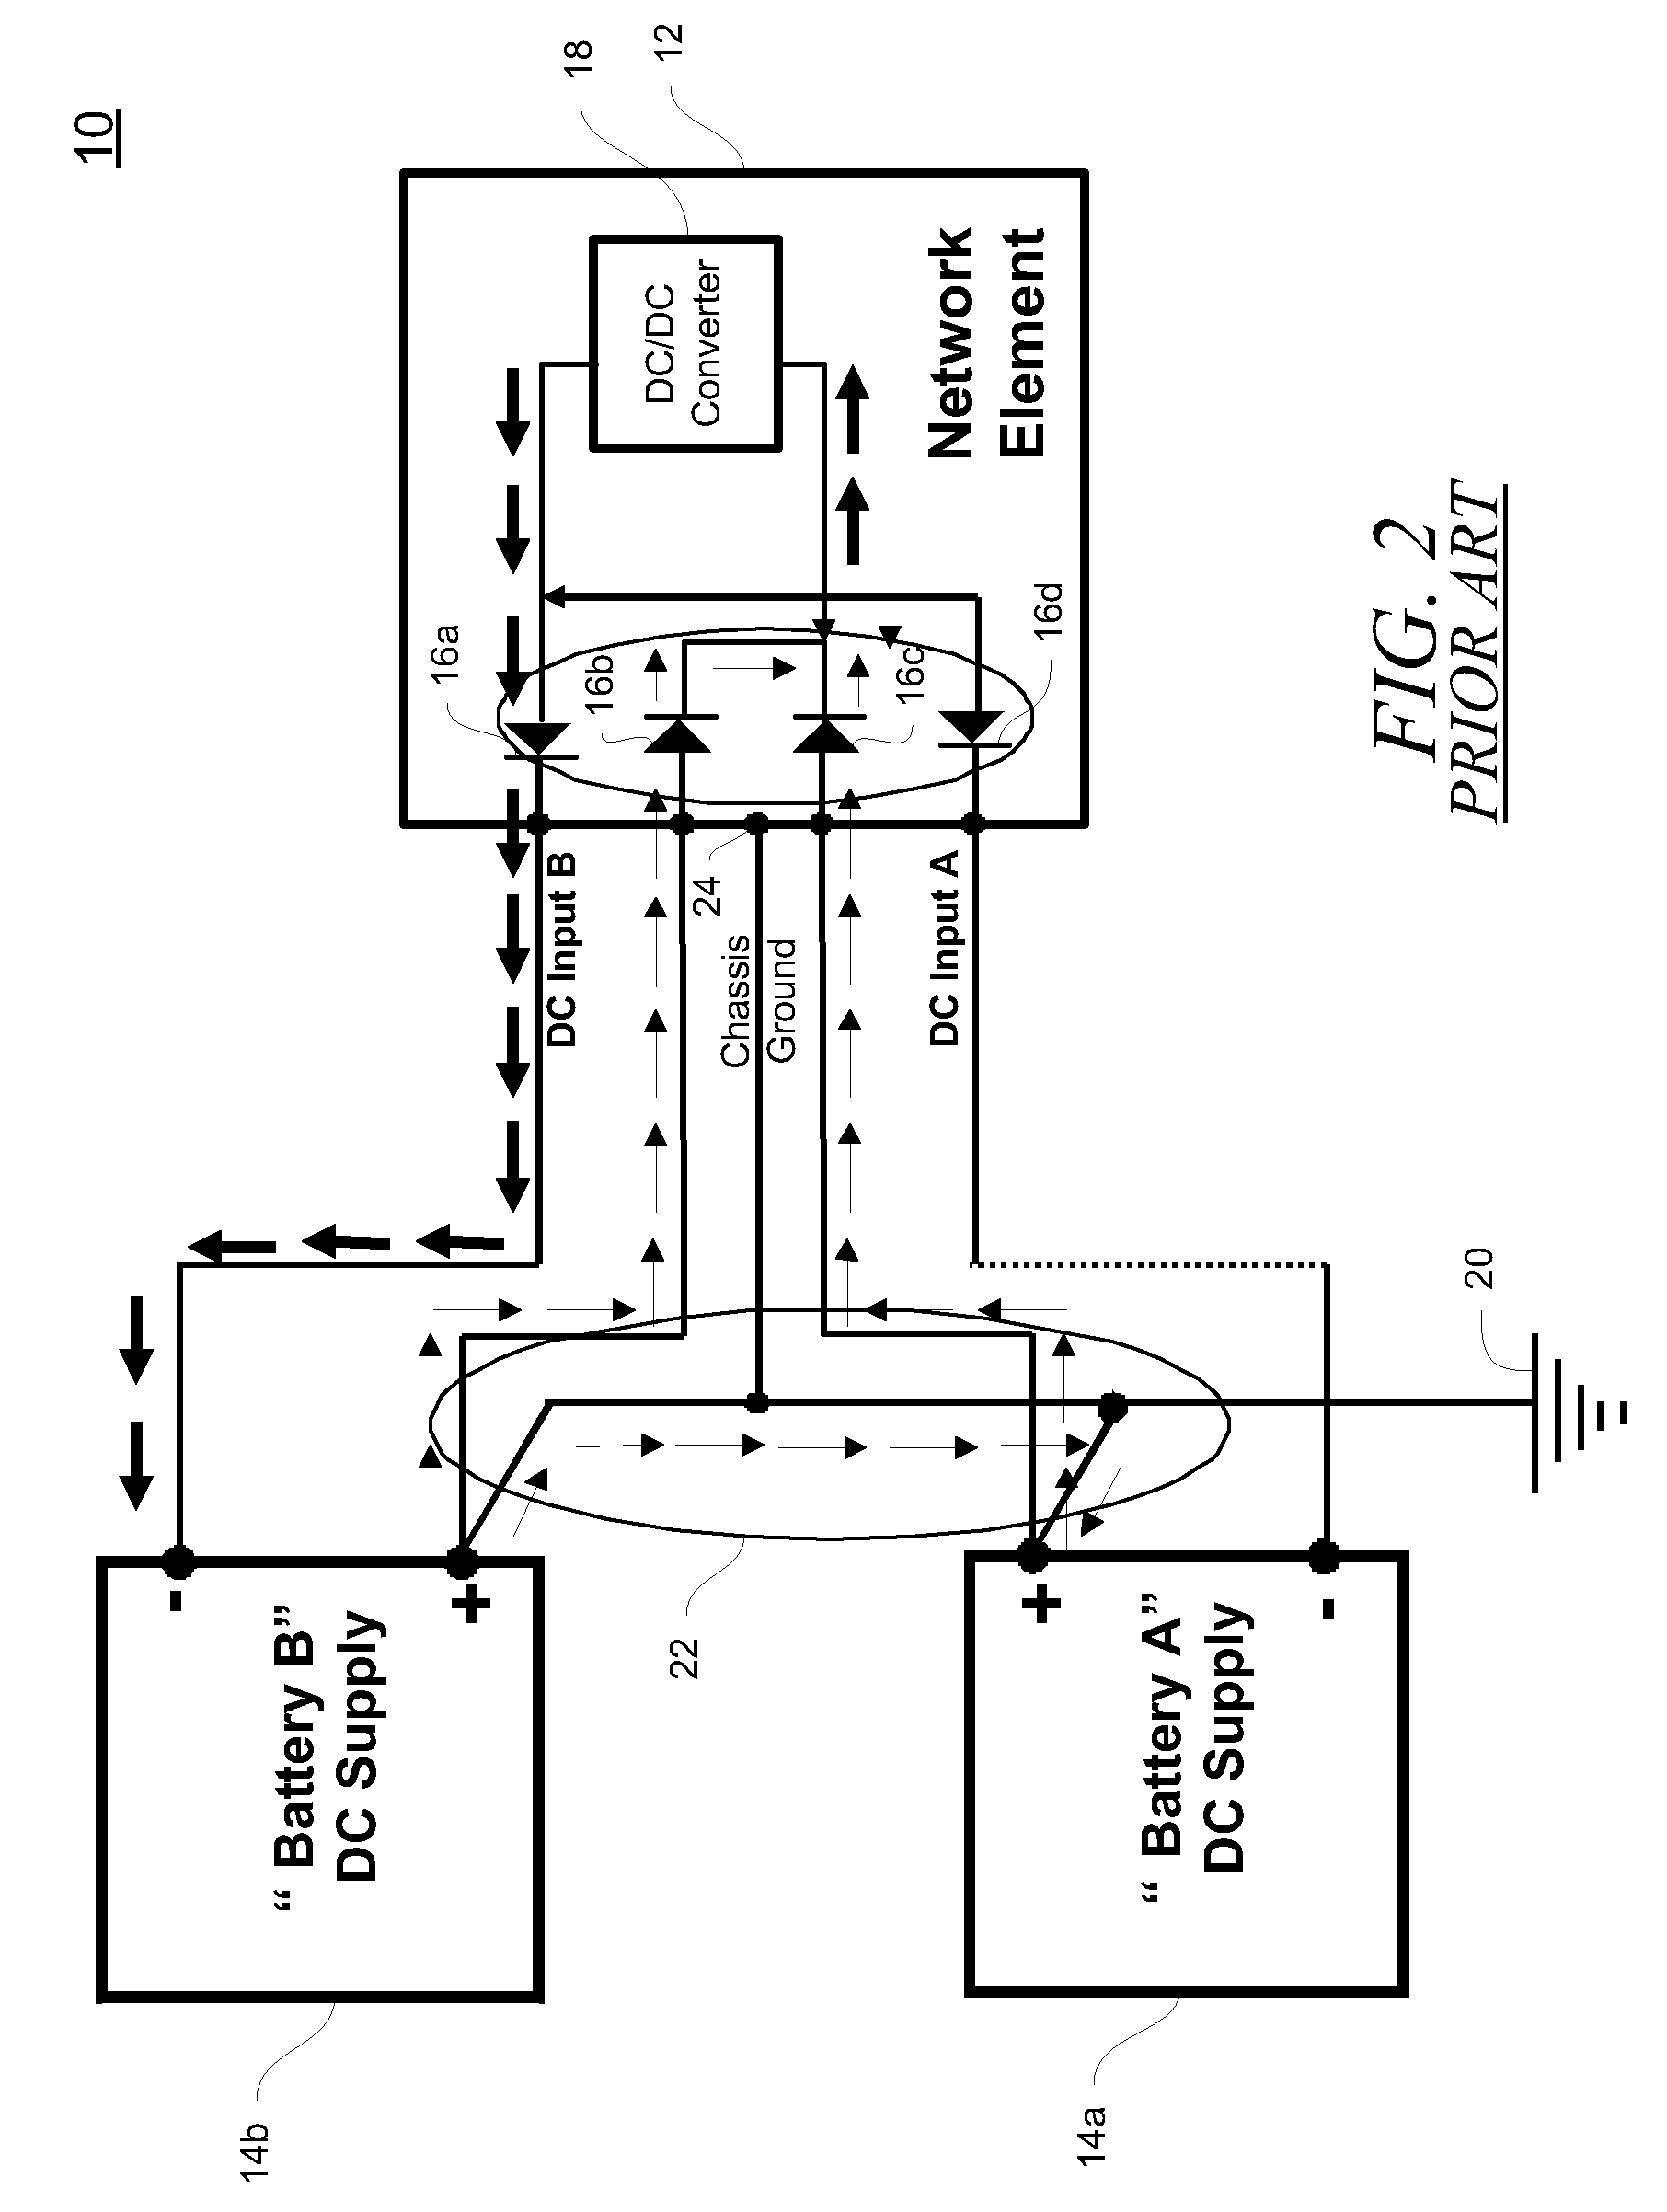 Method and system to stop return current from flowing into a disconnected power port of a dual battery powered device